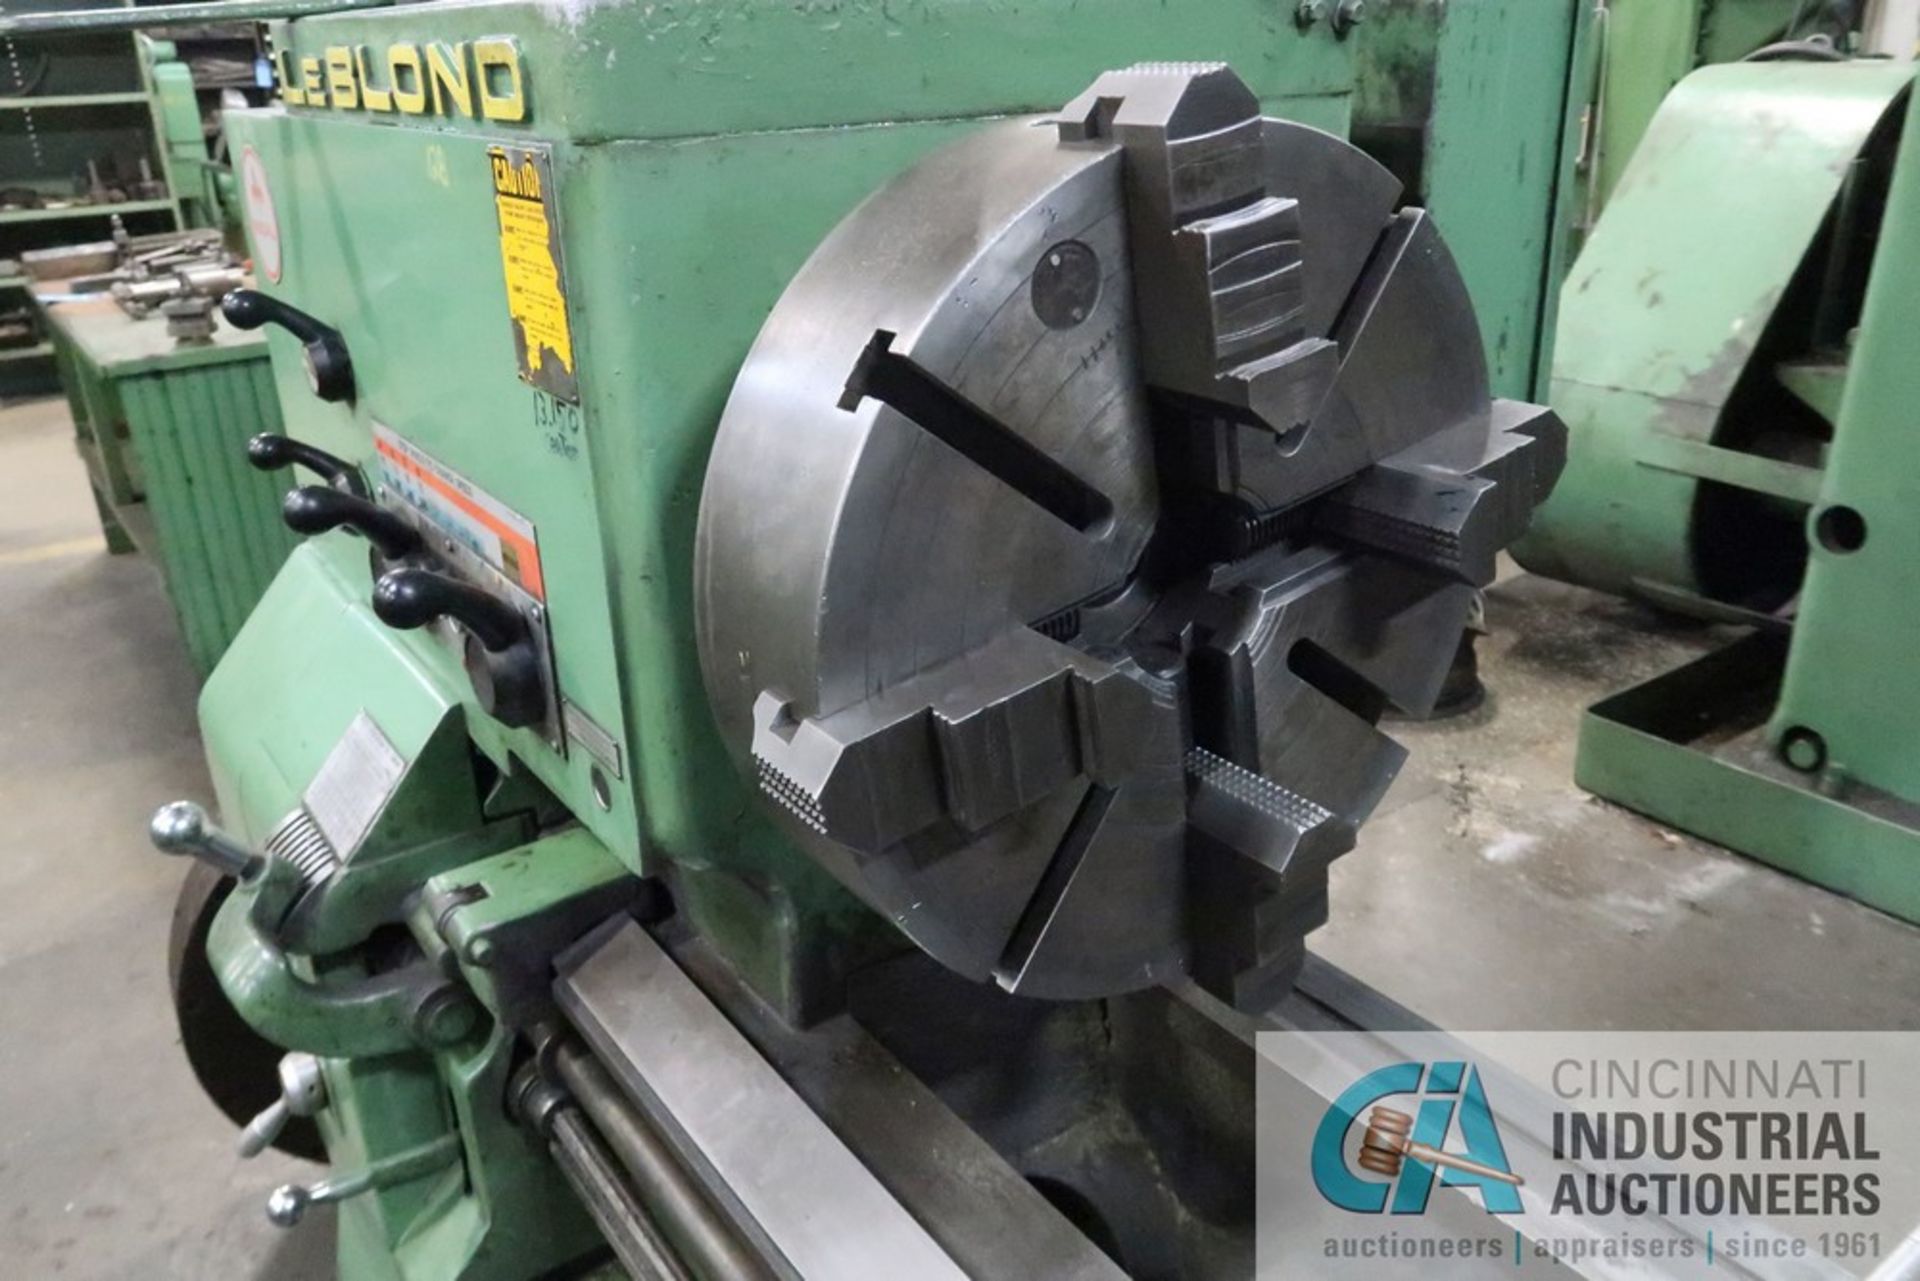 26" X 96" LEBLOND ENGINE LATHE; S/N 5H-555, 2" SPINDLE HOLE, 18" 4-JAW CHUCK, TAPER ATTACHMENT, - Image 8 of 15